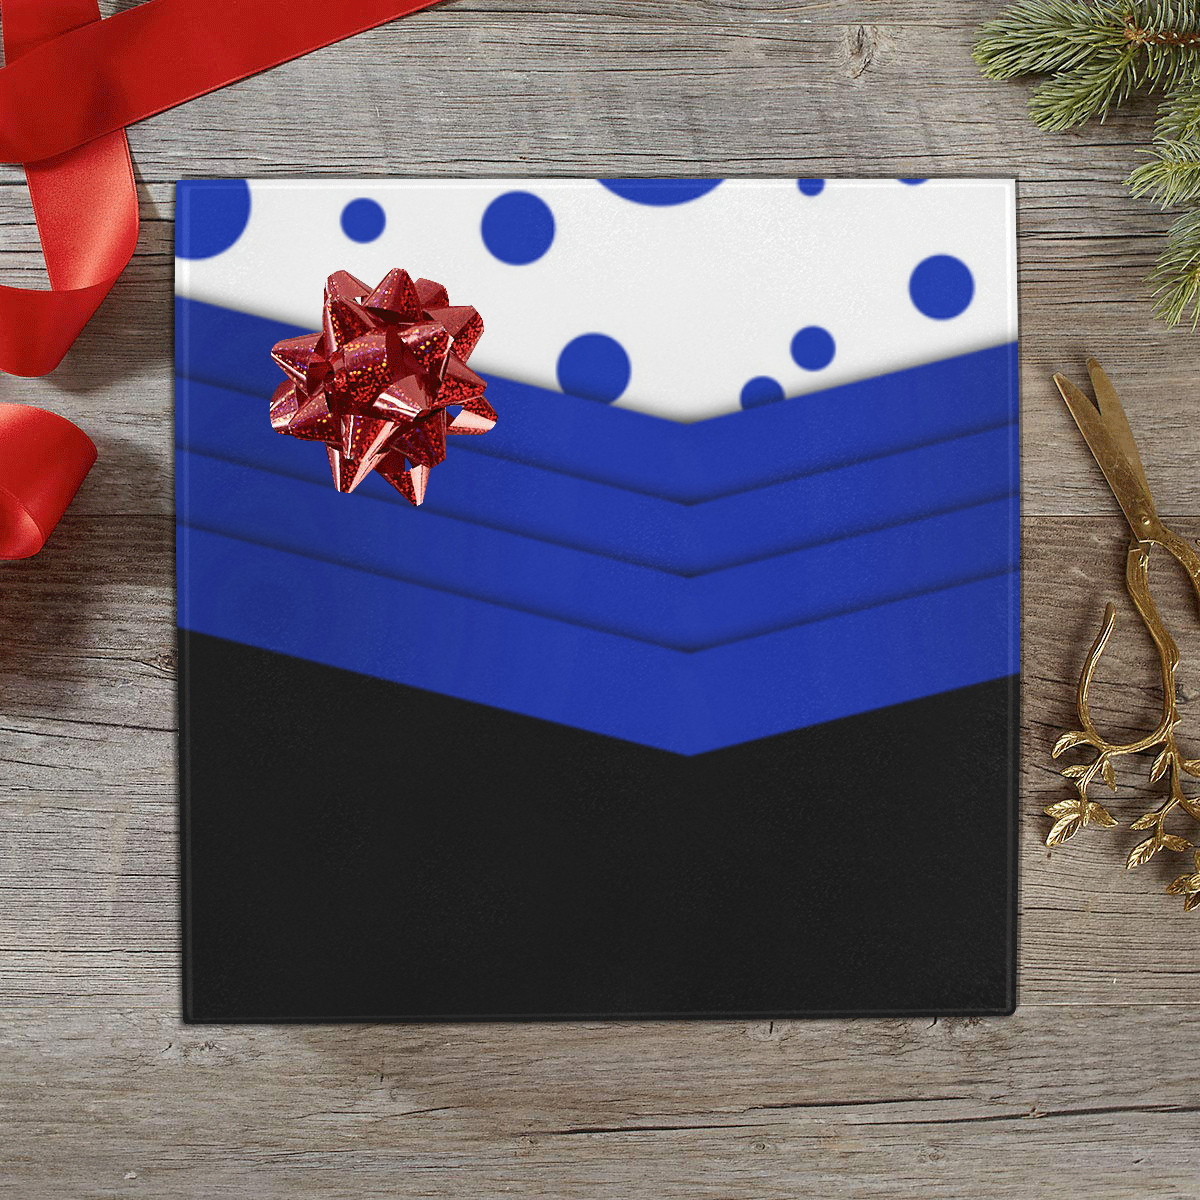 Polka Dots with Blue Sash and Black Bottom Gift Wrapping Paper 58"x 23" (3 Rolls)